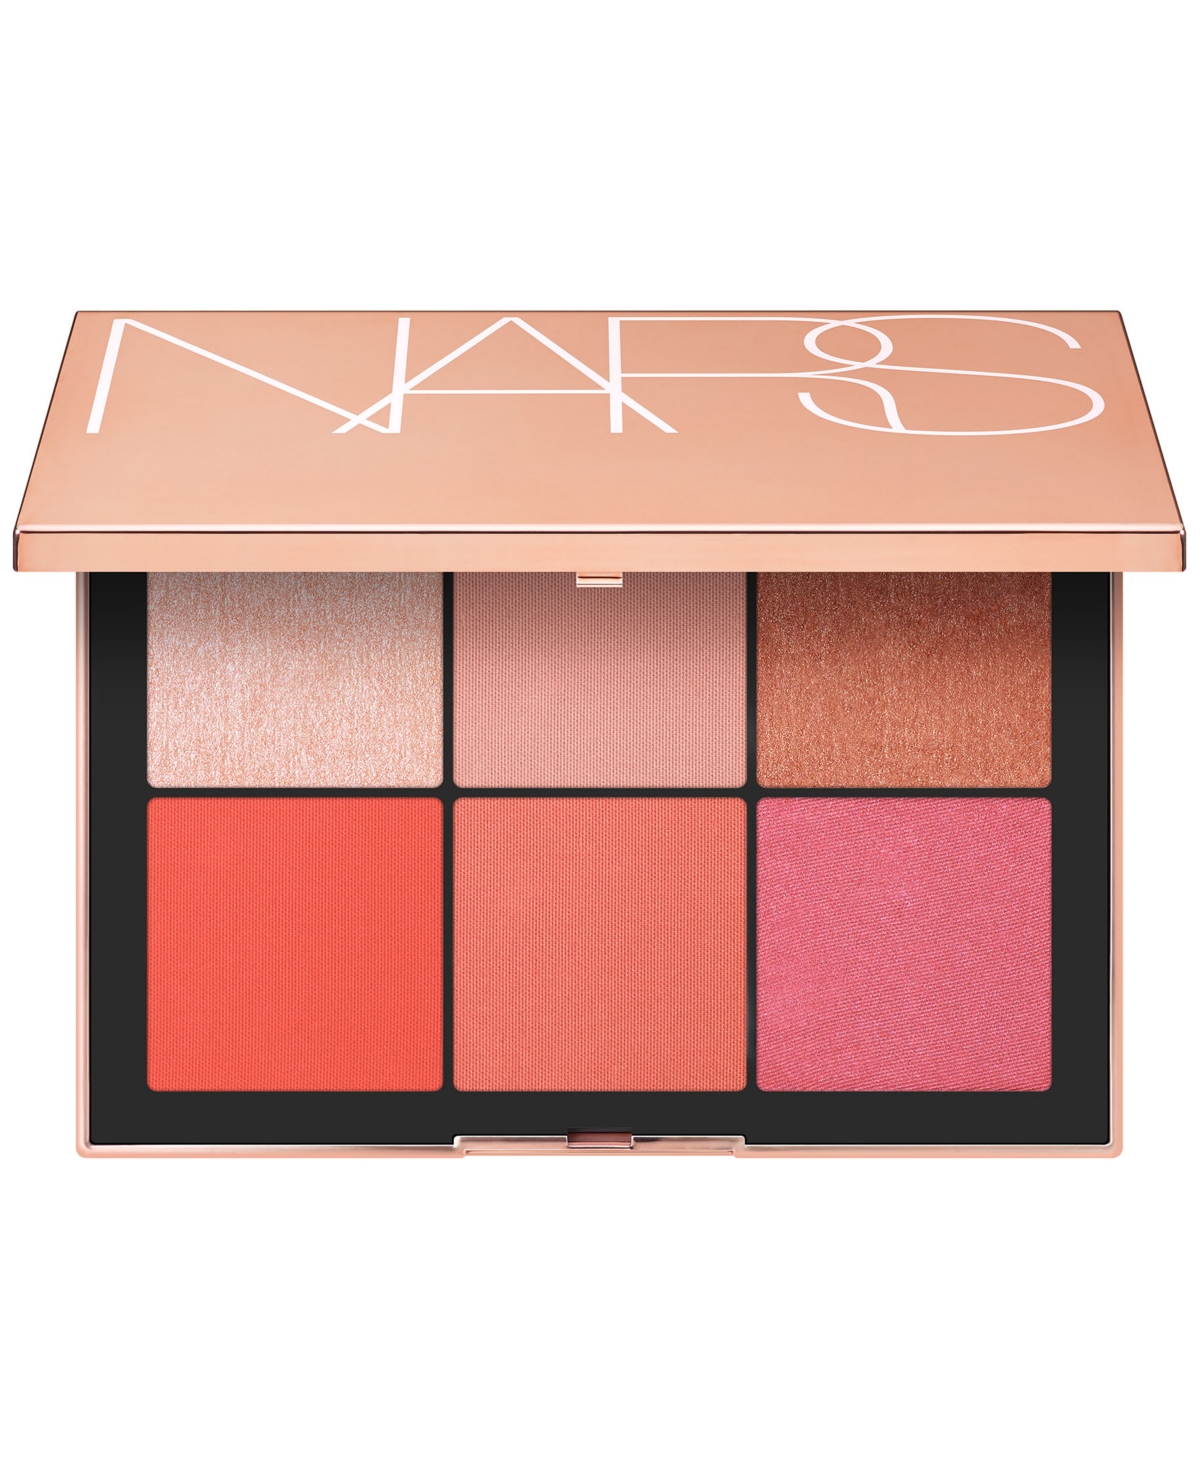 UPC 194251077086 product image for Nars Afterglow Cheek Palette | upcitemdb.com